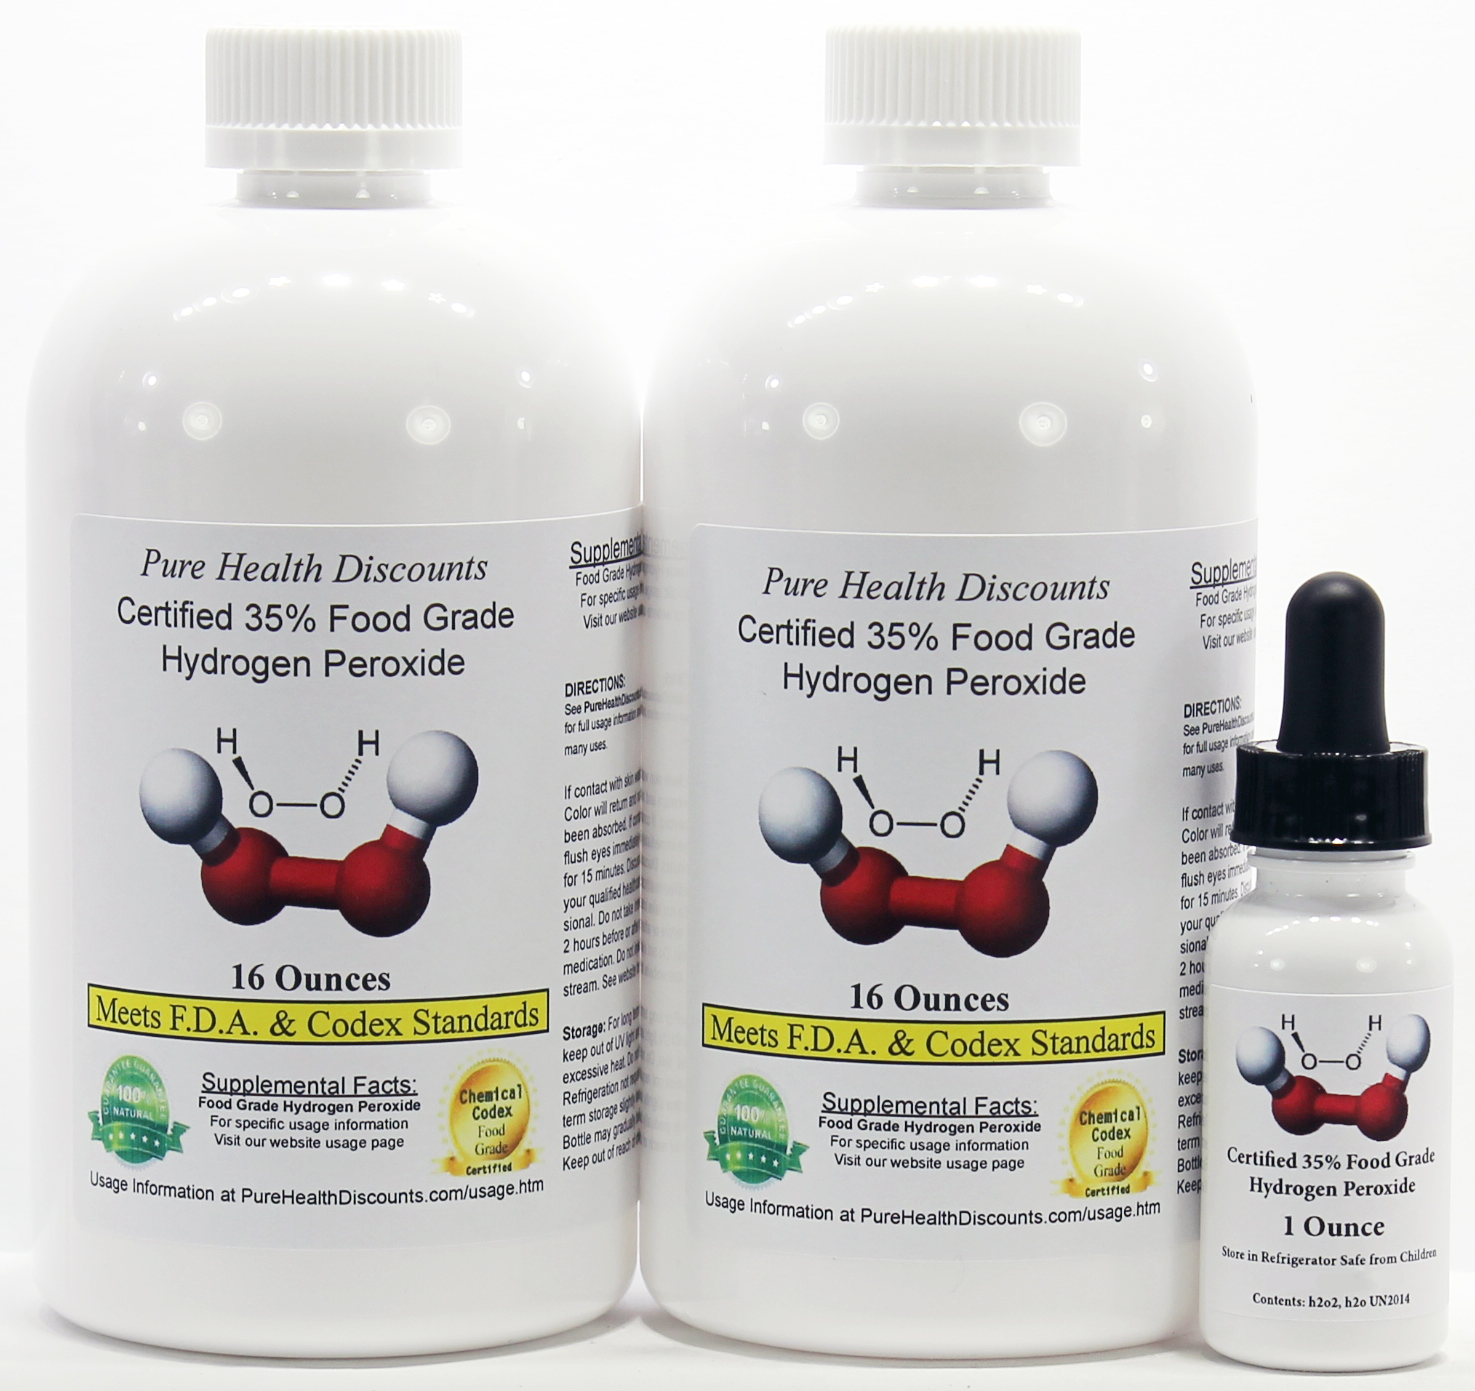 35 Food Grade Hydrogen Peroxide Discount Ordering Page Since 1983 